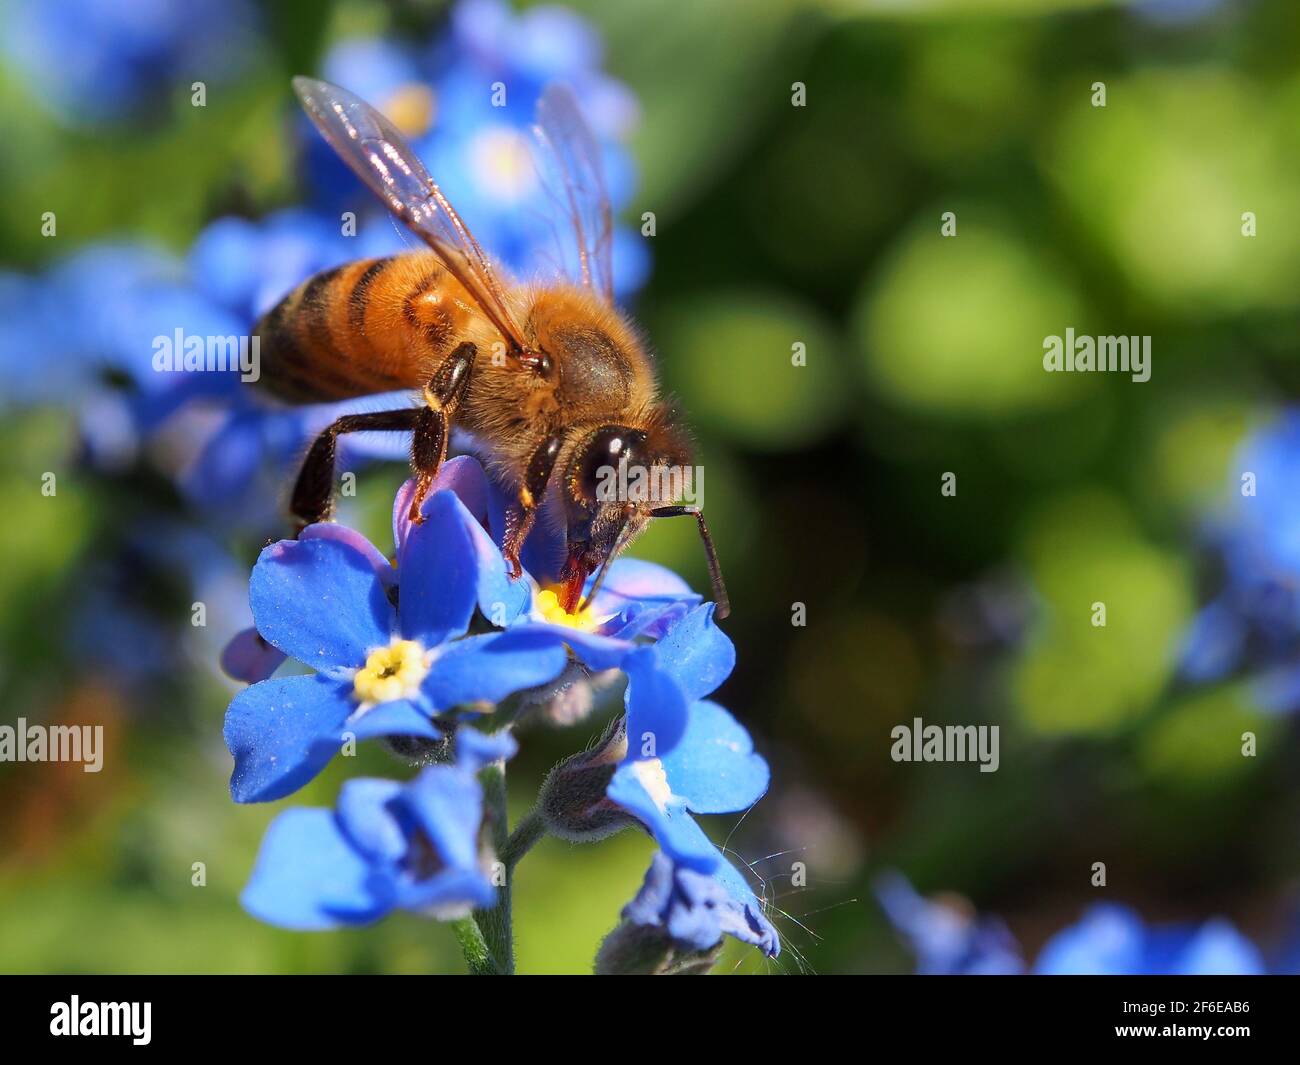 A honey bee sat on some scorpion grass collecting pollen and nectar on a sunny day Stock Photo